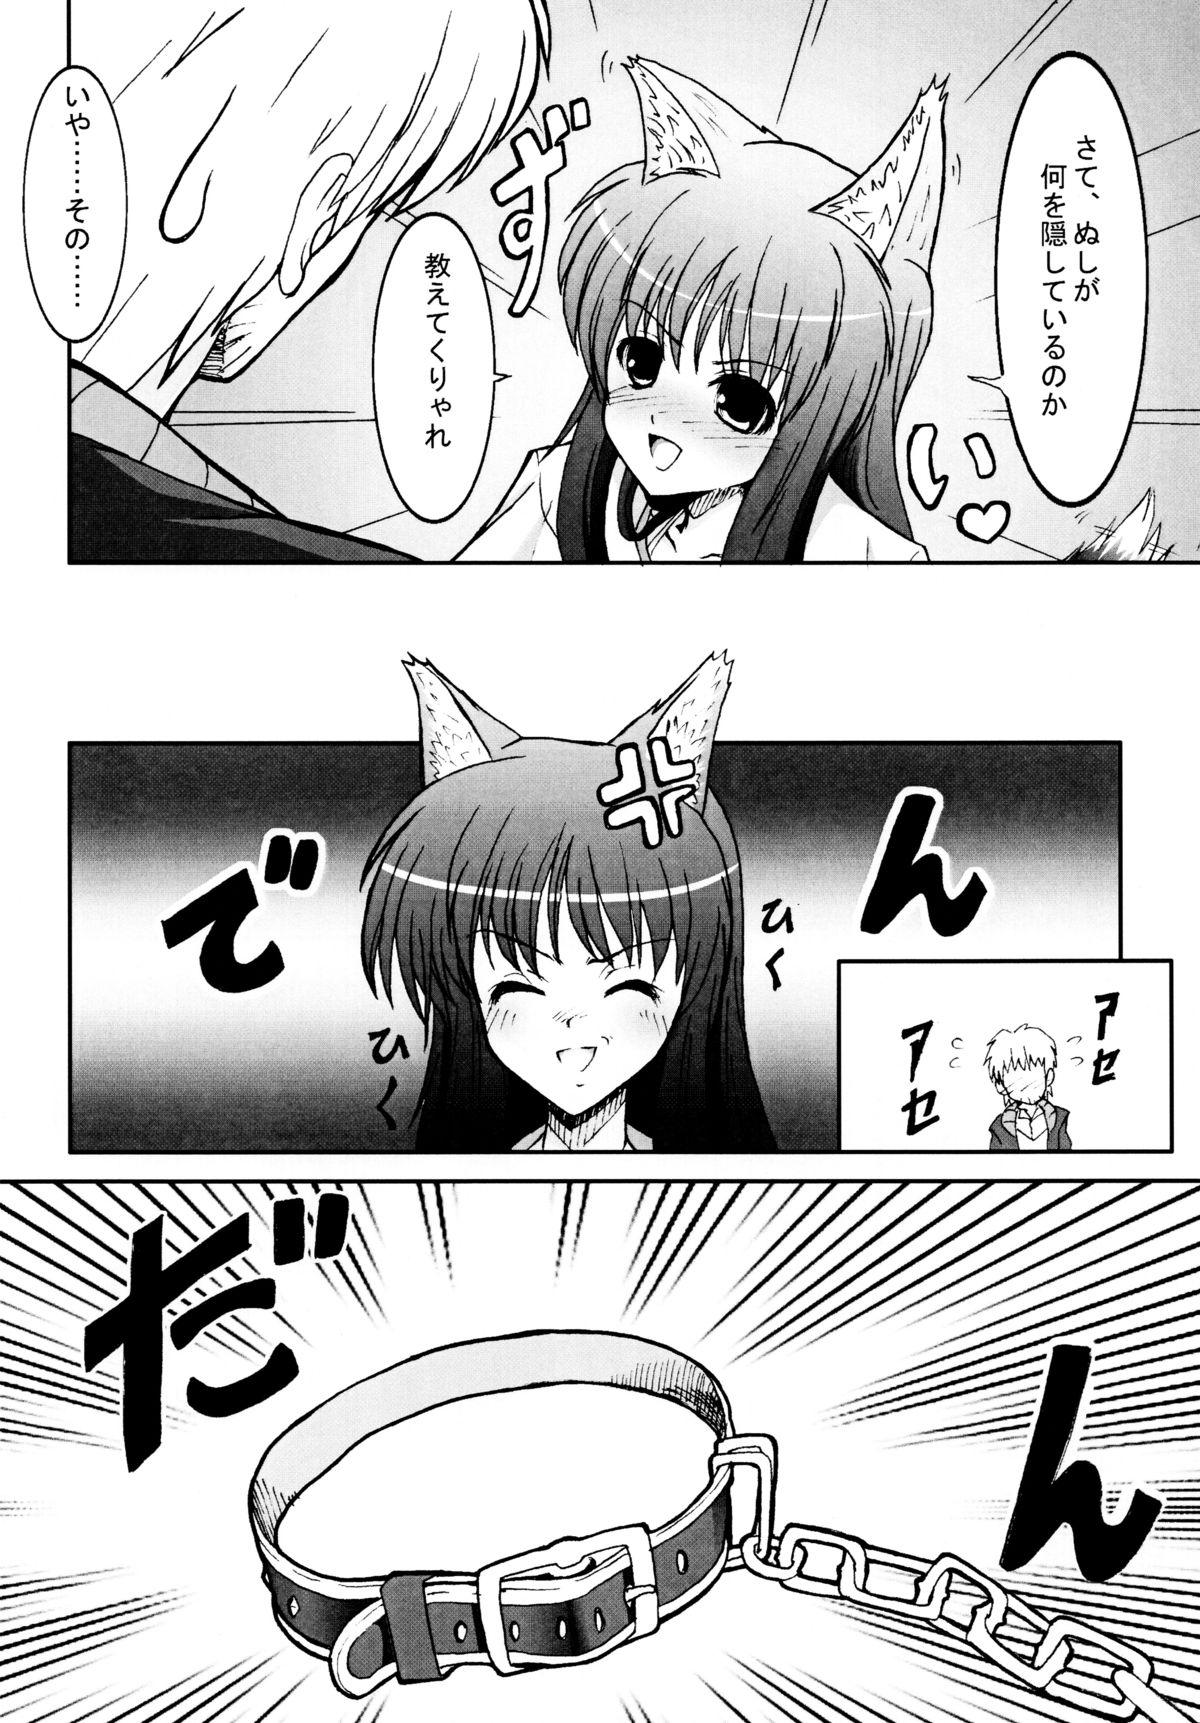 Aussie Ookami to Ai no Kusari - Spice and wolf Pickup - Page 6